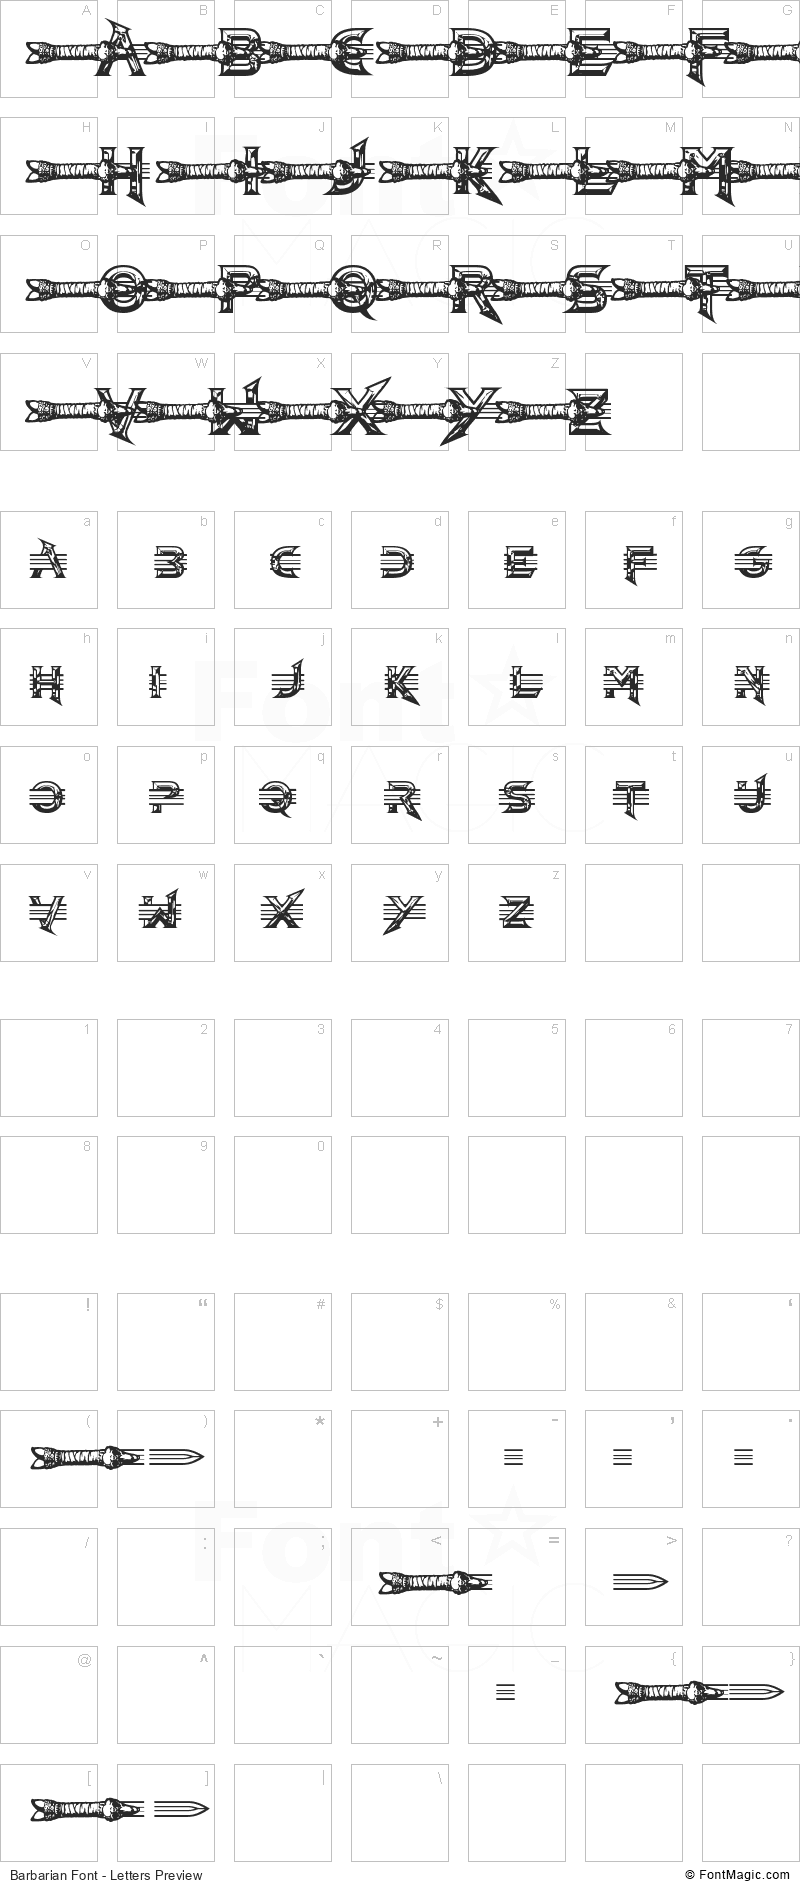 Barbarian Font - All Latters Preview Chart